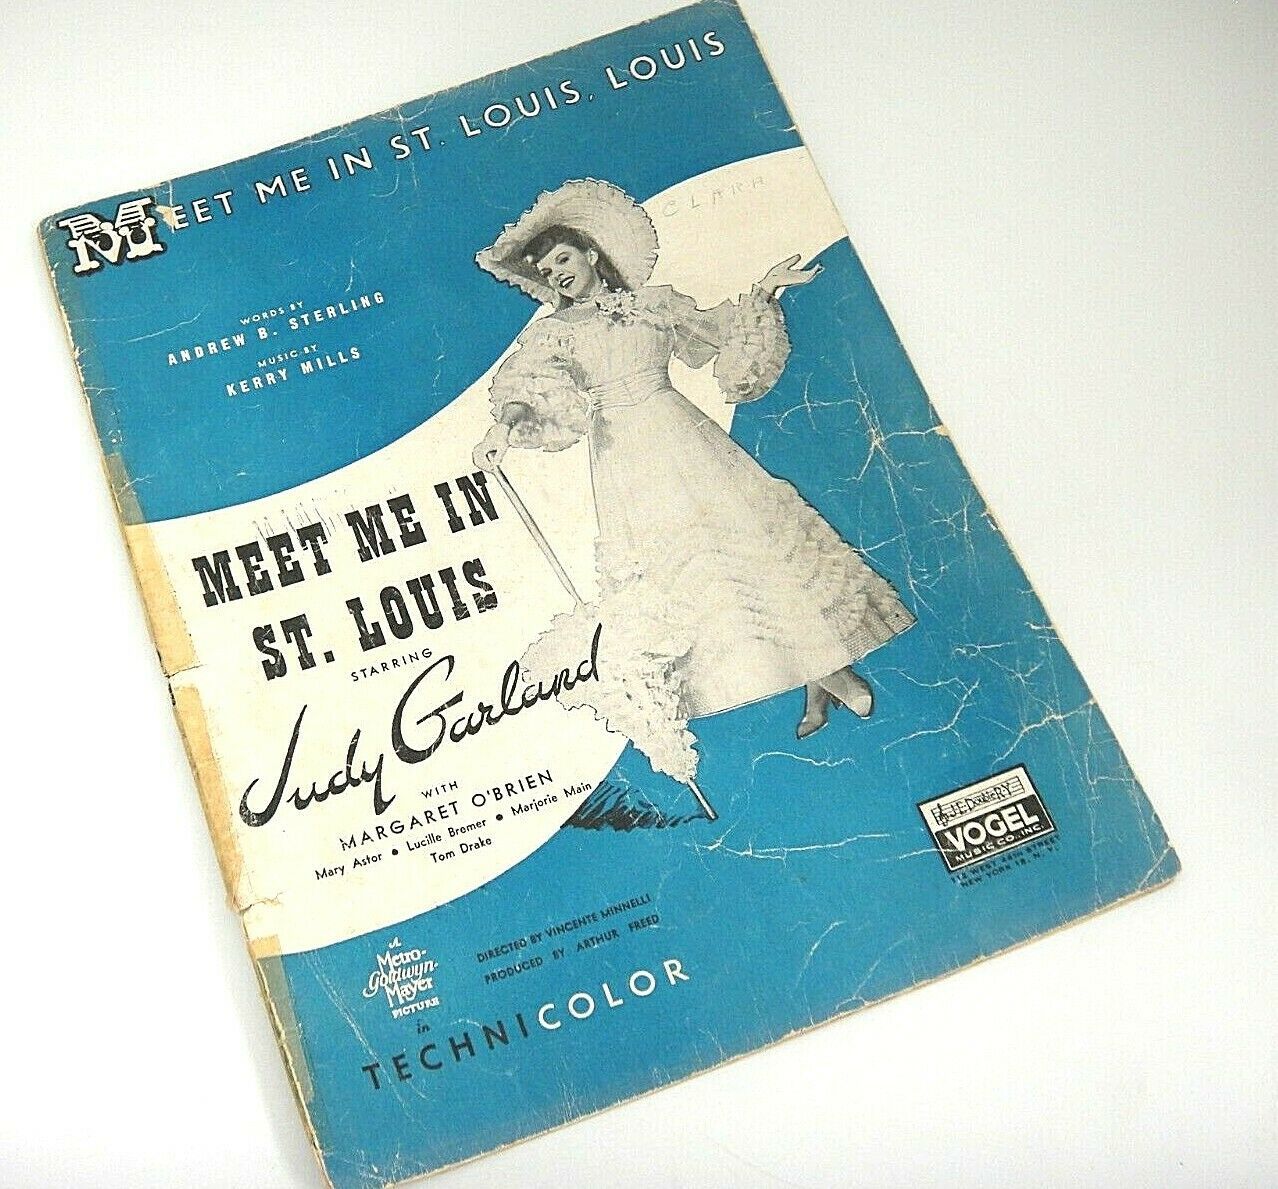 Primary image for Meet Me In St. Louis Sheet Music 1931 Andrew Sterling & Kerry Miles Judy Garland